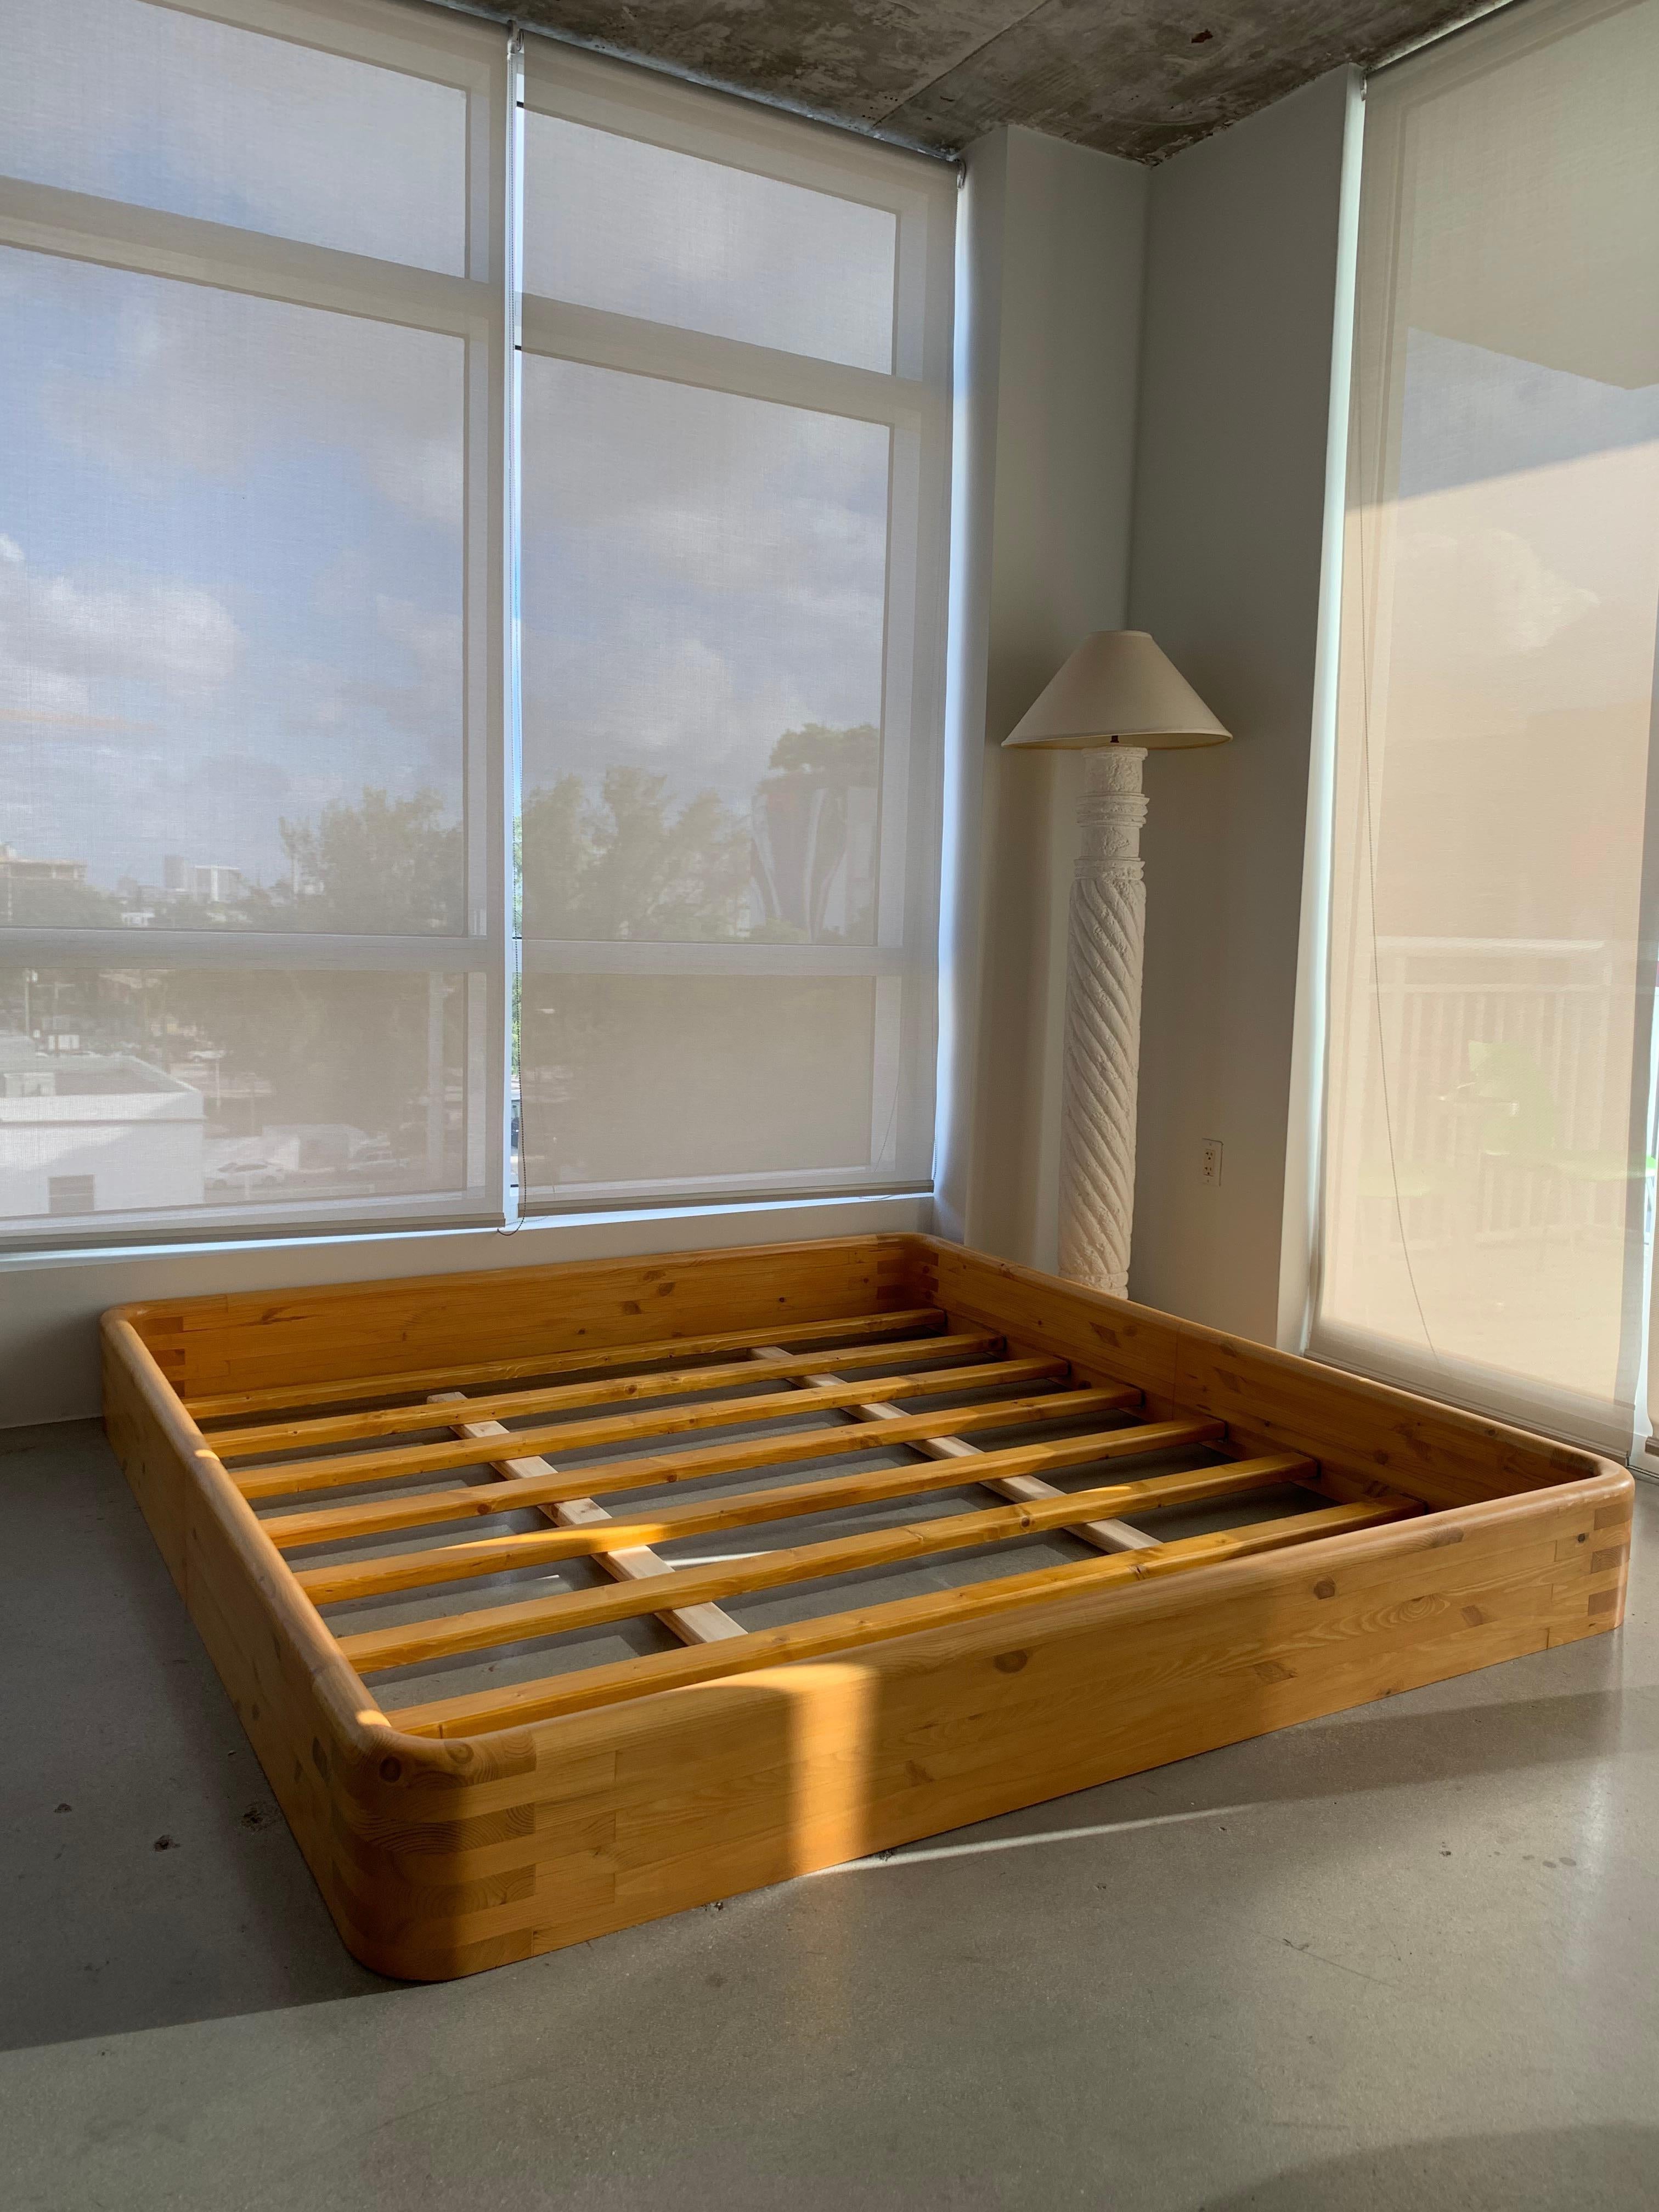 21st century custom bentwood king bed frame handcrafted in Jupiter Florida. Beautiful layered pine sanded and stained a lovely light natural color with waterfall edges and a round beveled rim. Perfect low profile bed with interior slat boards for